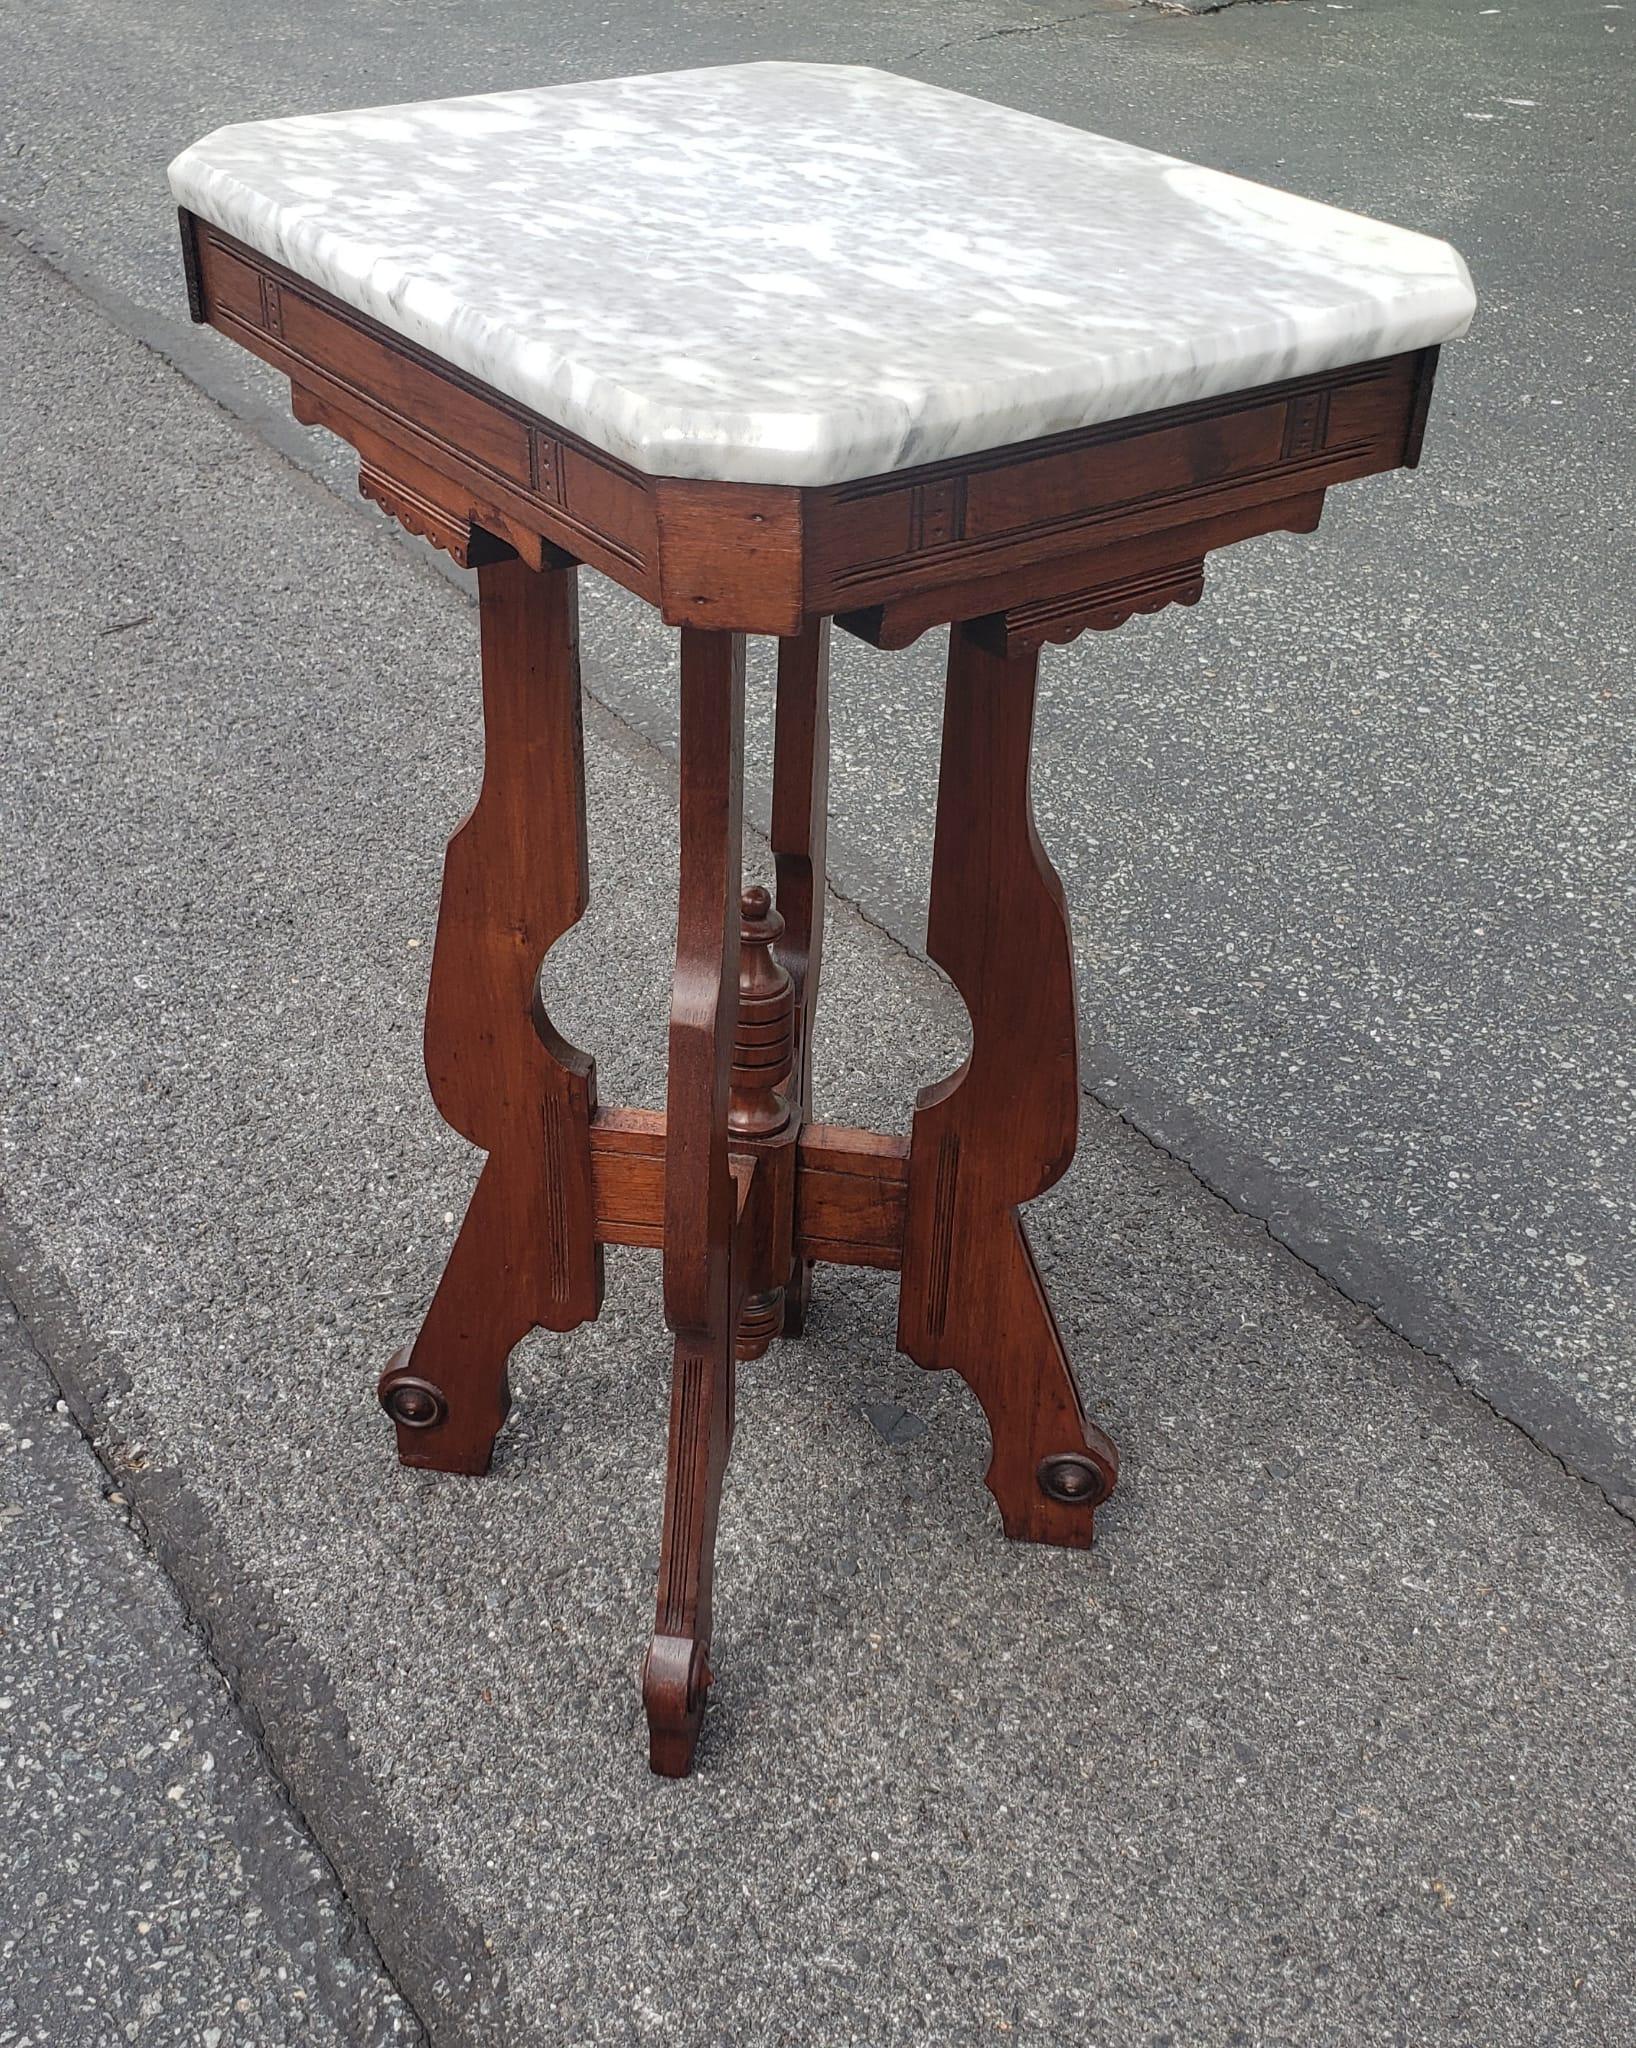 Victorian refinished Carved Mahogany and Marble Top Candle Srand or Side Table in good antique condition. Measures 14